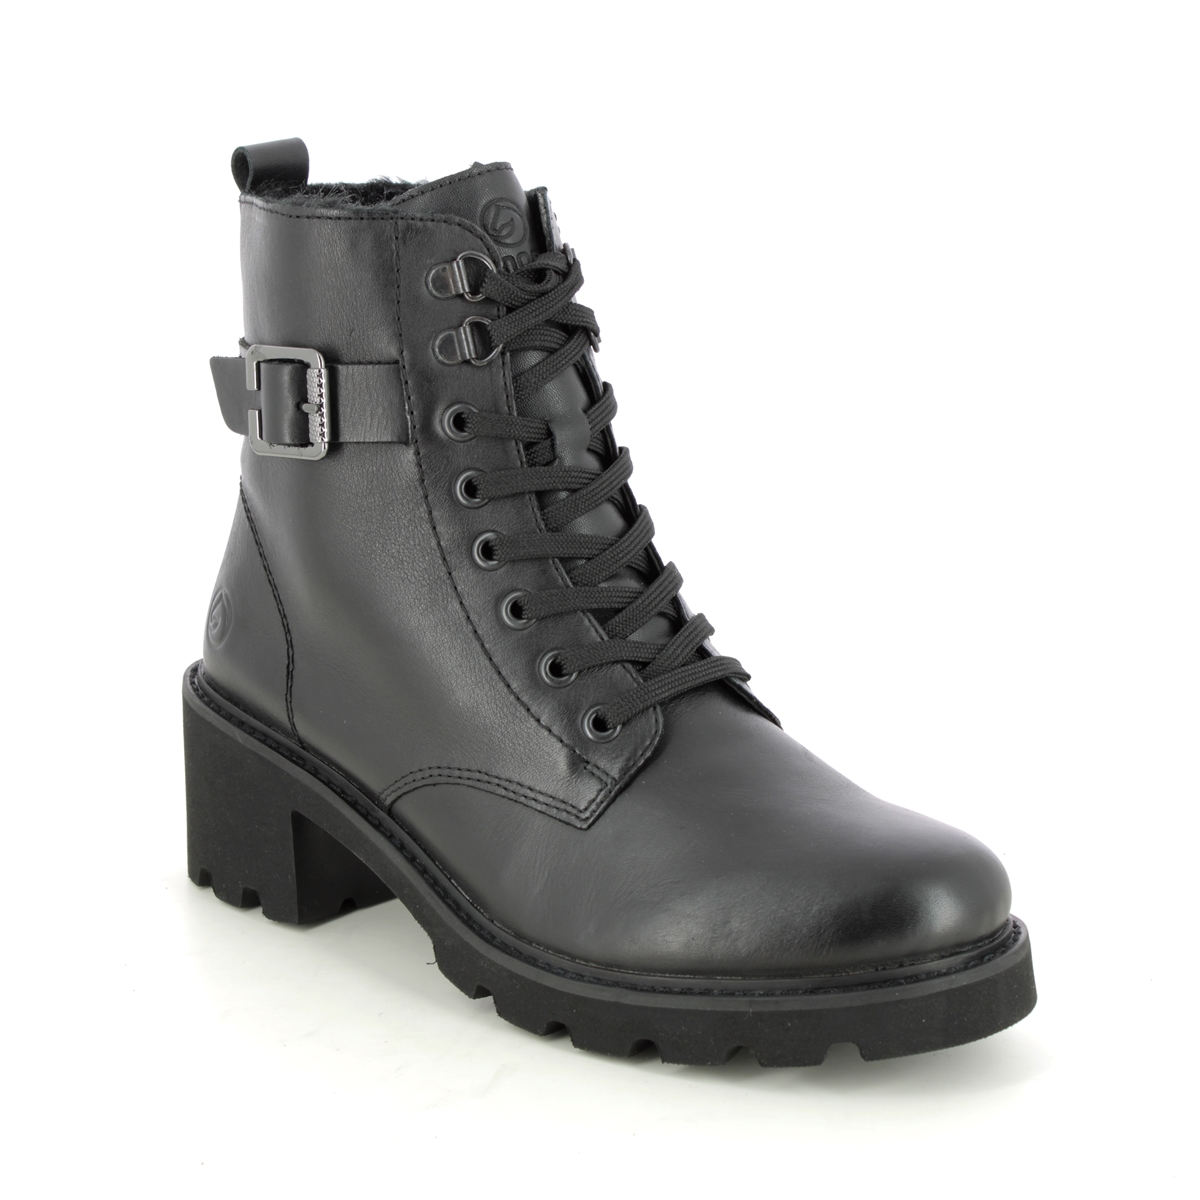 Remonte Bodola Black Leather Womens Lace Up Boots D0A74-01 In Size 40 In Plain Black Leather